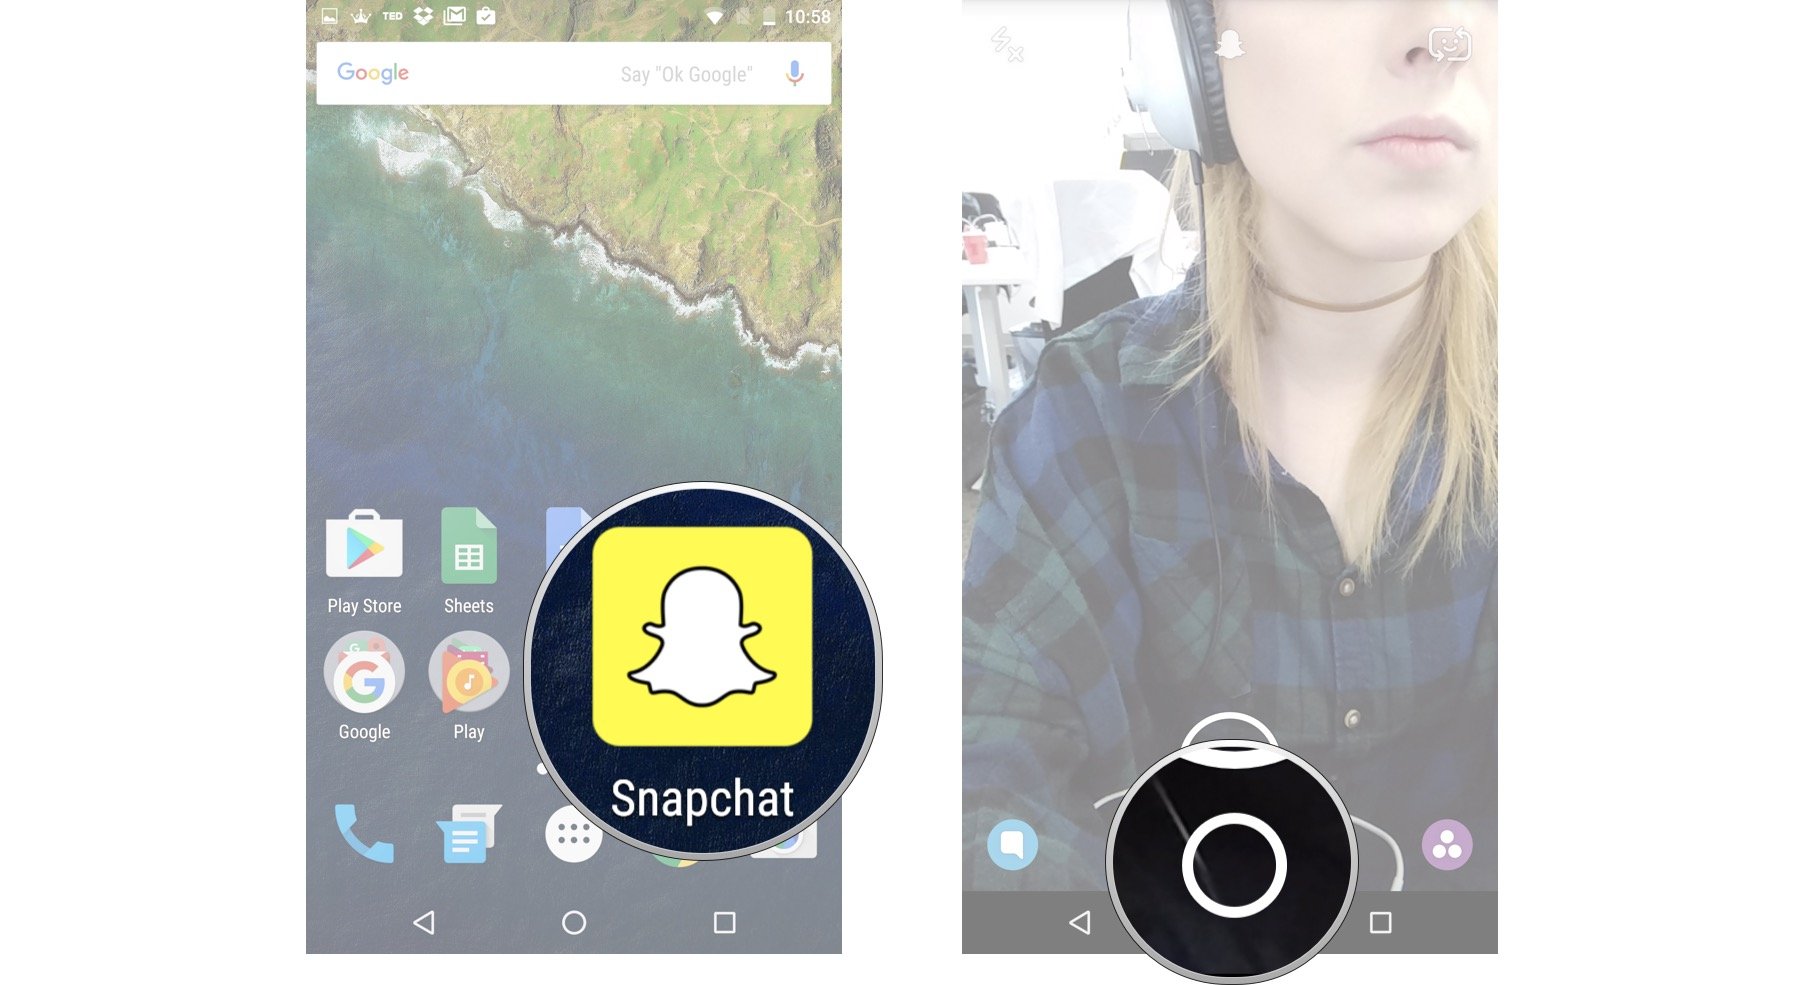 Launch Snapchat from your home screen and tap the smaller white circle below the shutter button to access Memories. Tap the Stories tab at the top of the screen.